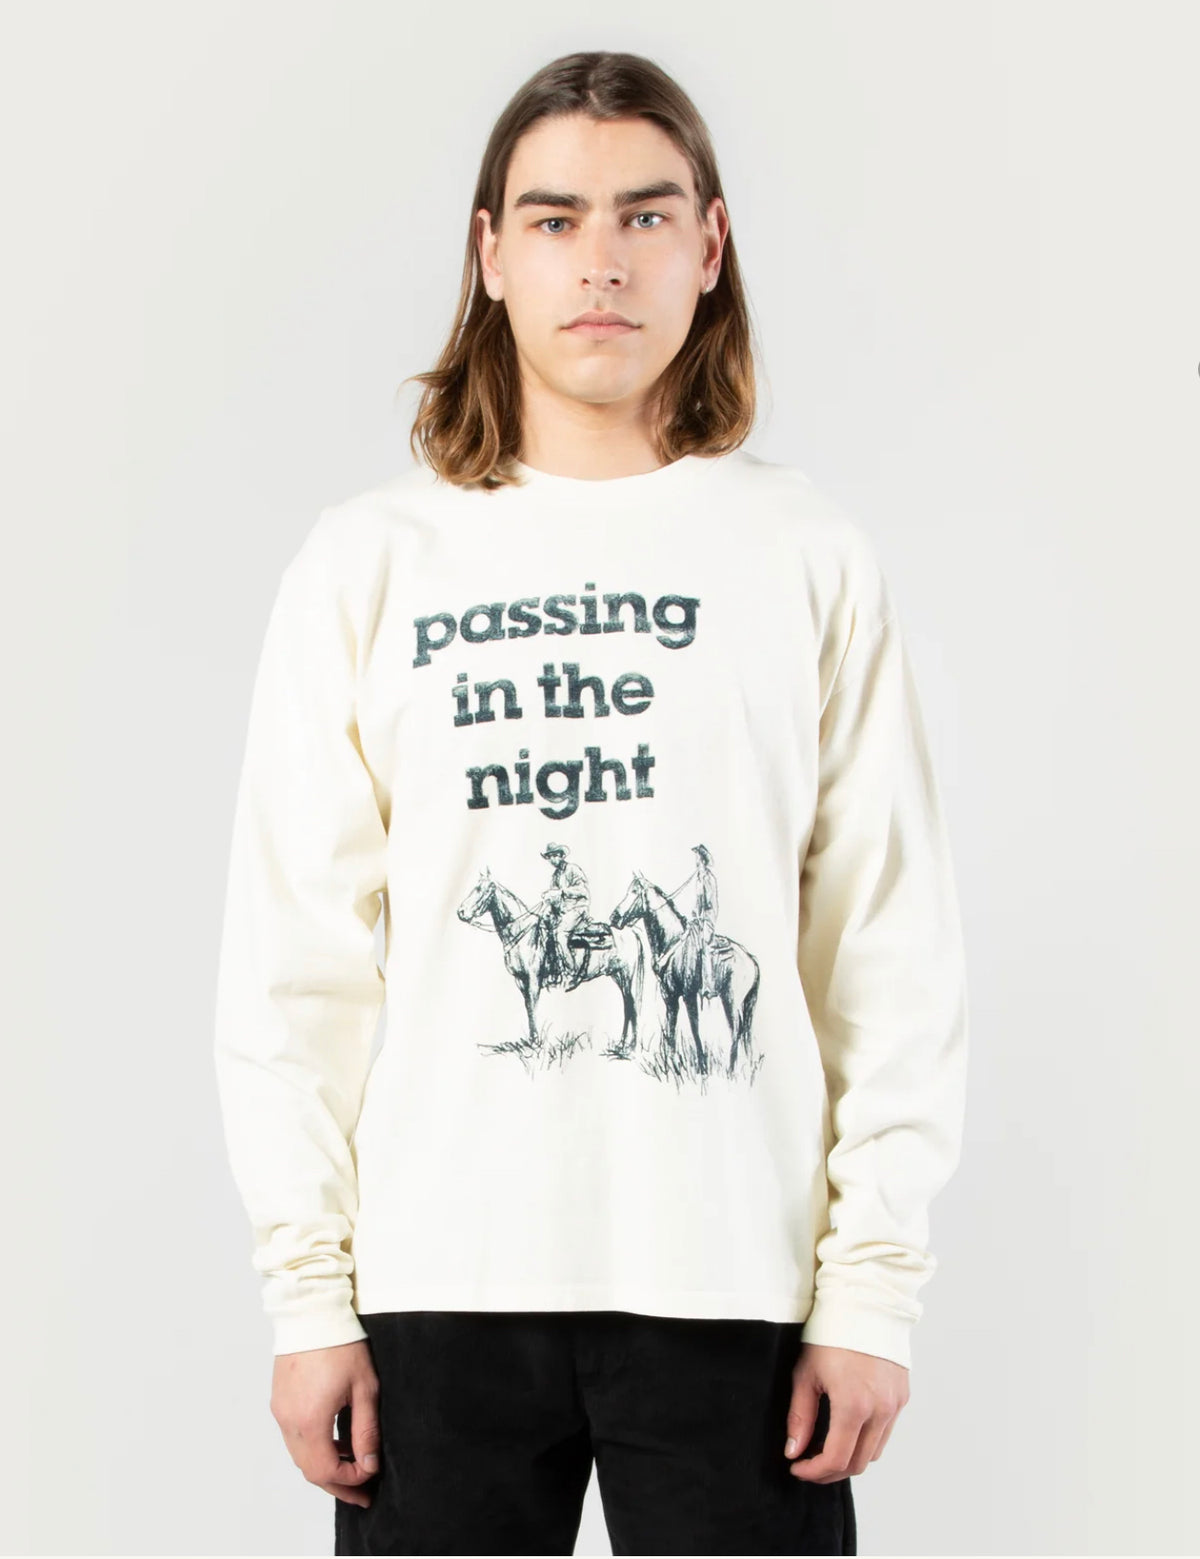 One Of These Days In The Night Passing  Long Sleeve T-Shirt (Excluded From ALL Discount Codes)